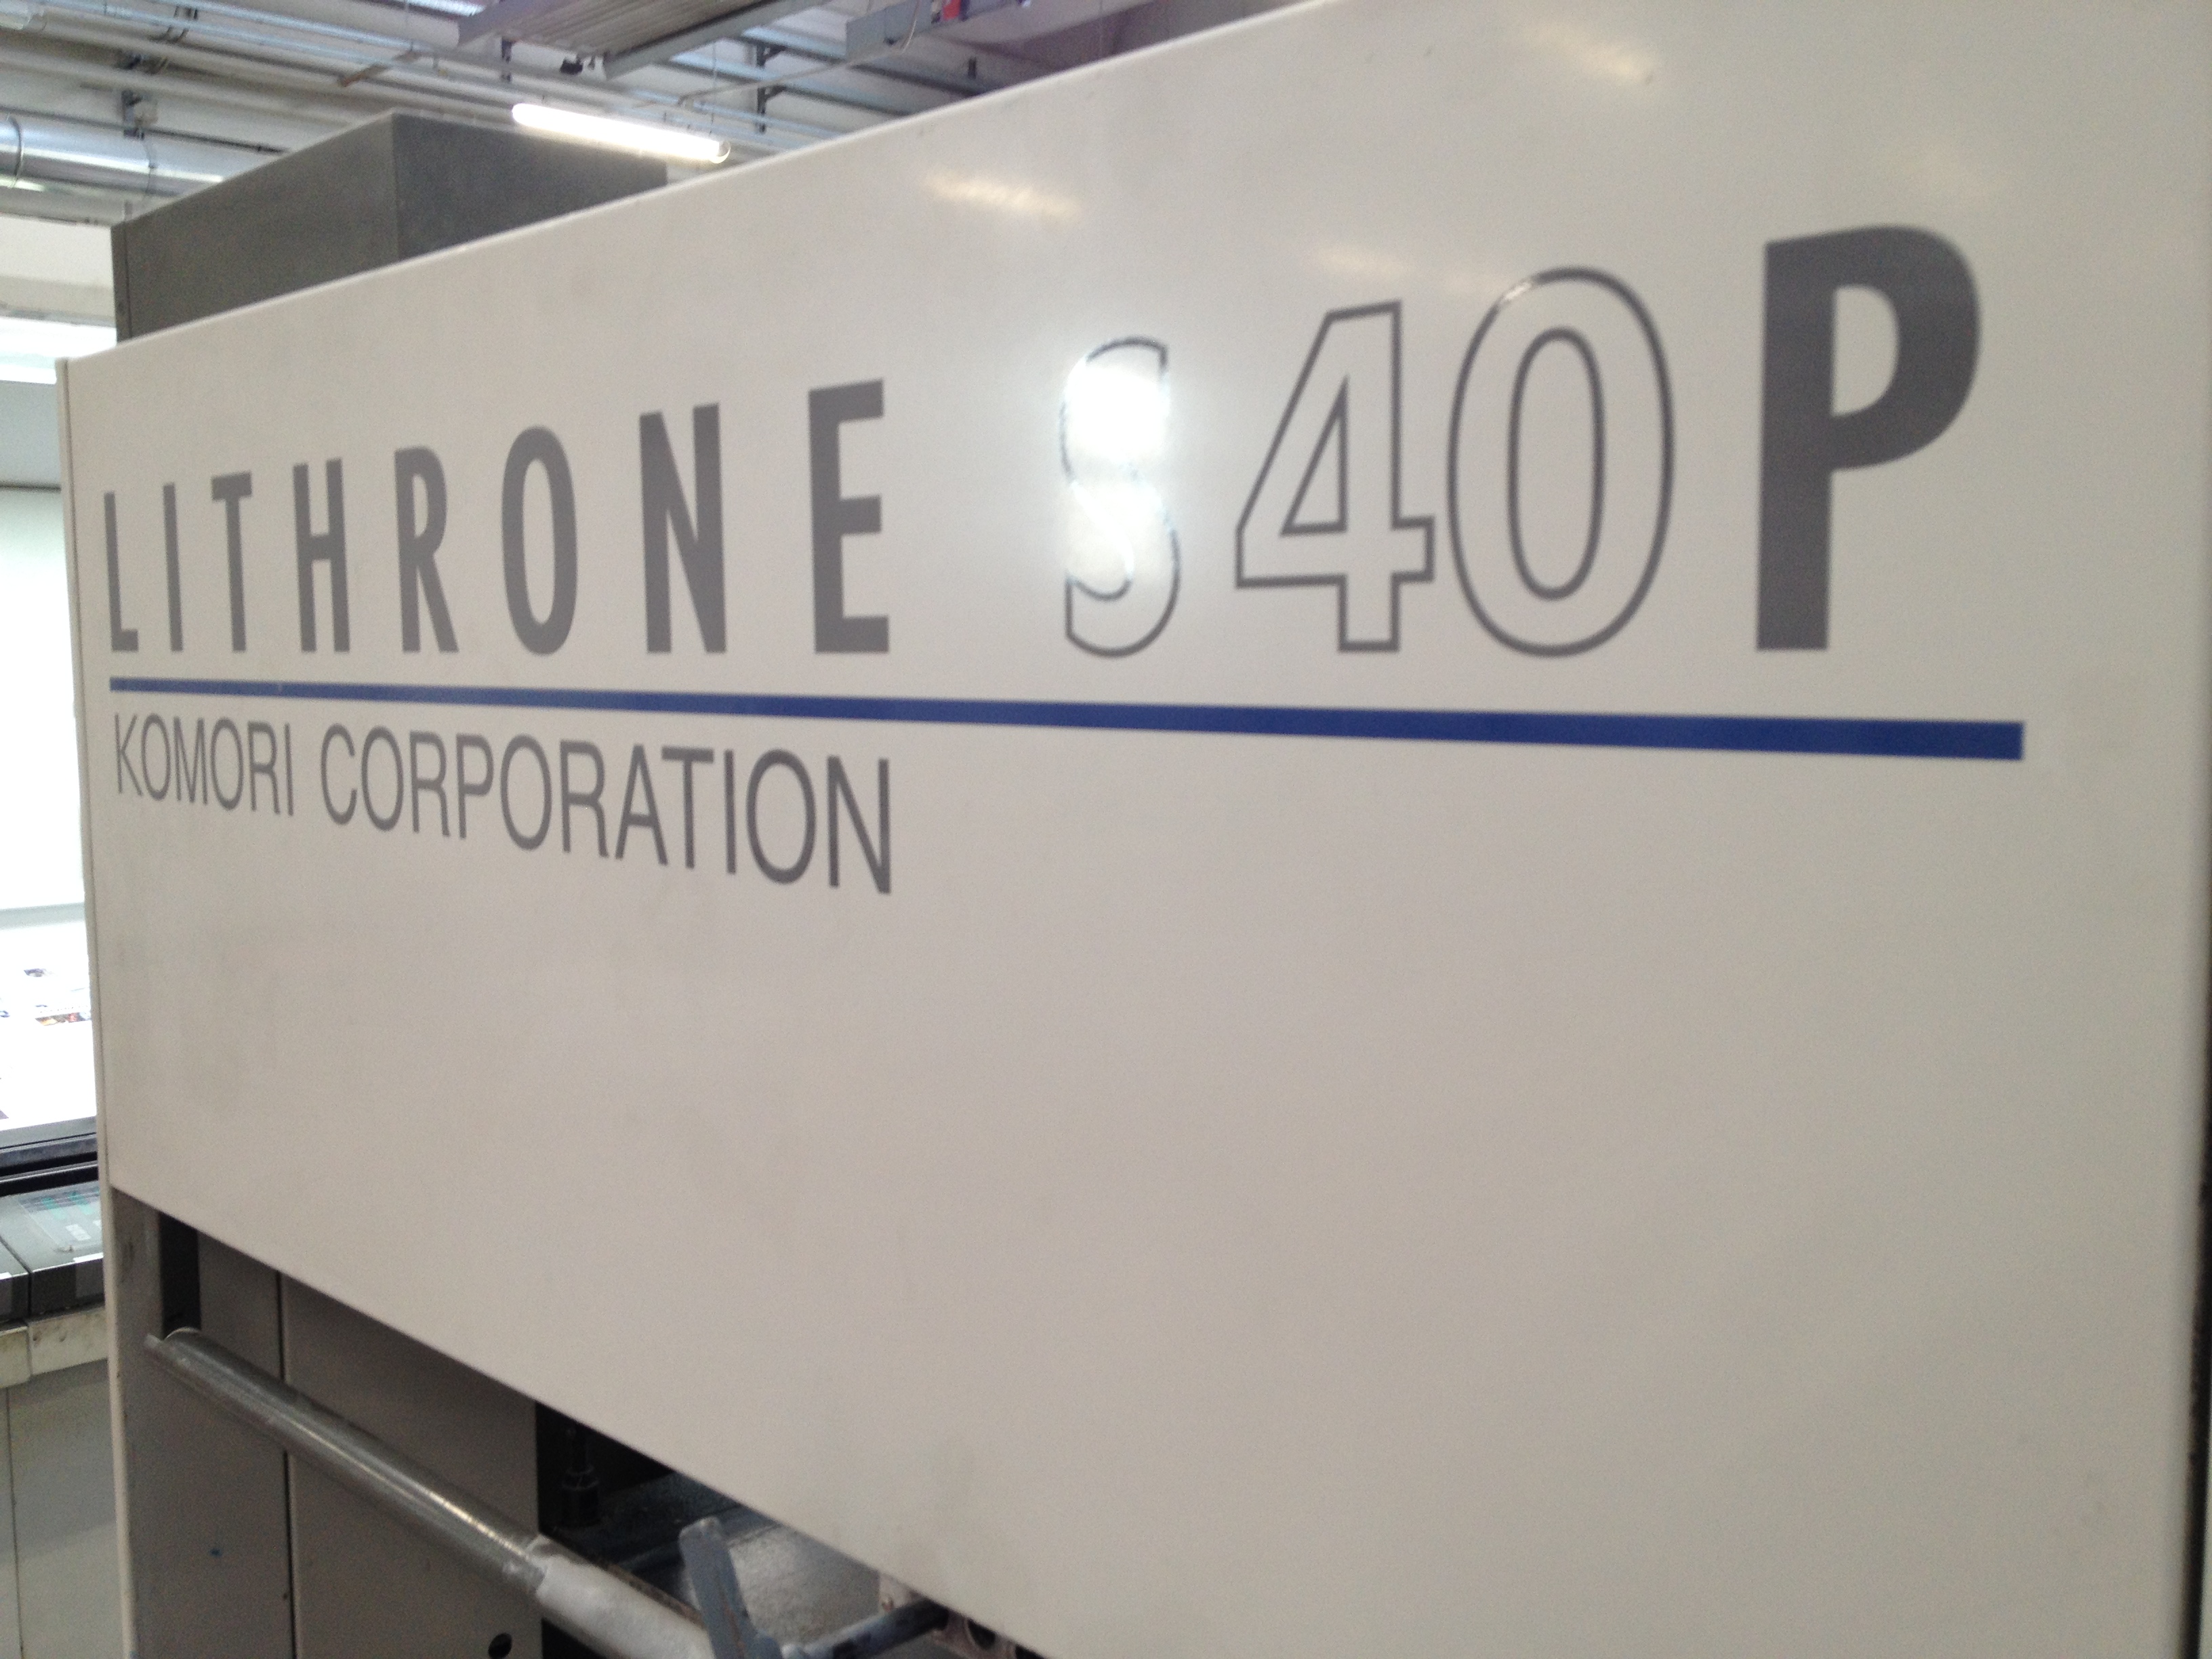 Komori Lithrone-L-840-P Sheet Fed / Offset Used Machinery for sale